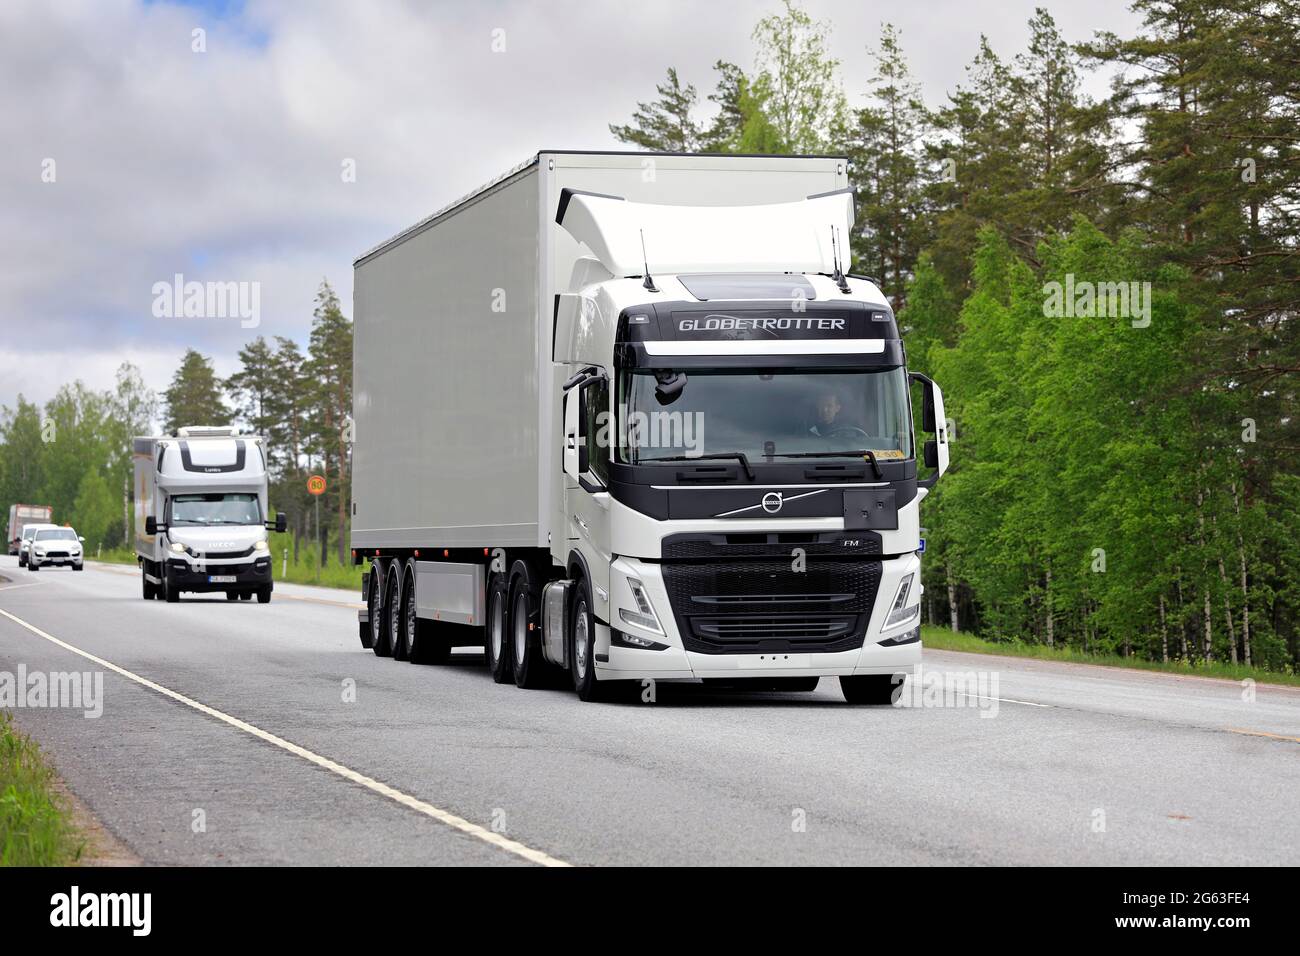 Raasepori, Finland. May 27, 2021. Volvo Trucks presents Volvo FM 460 Globe truck as part of their new truck range, here test driven on road 25. Stock Photo